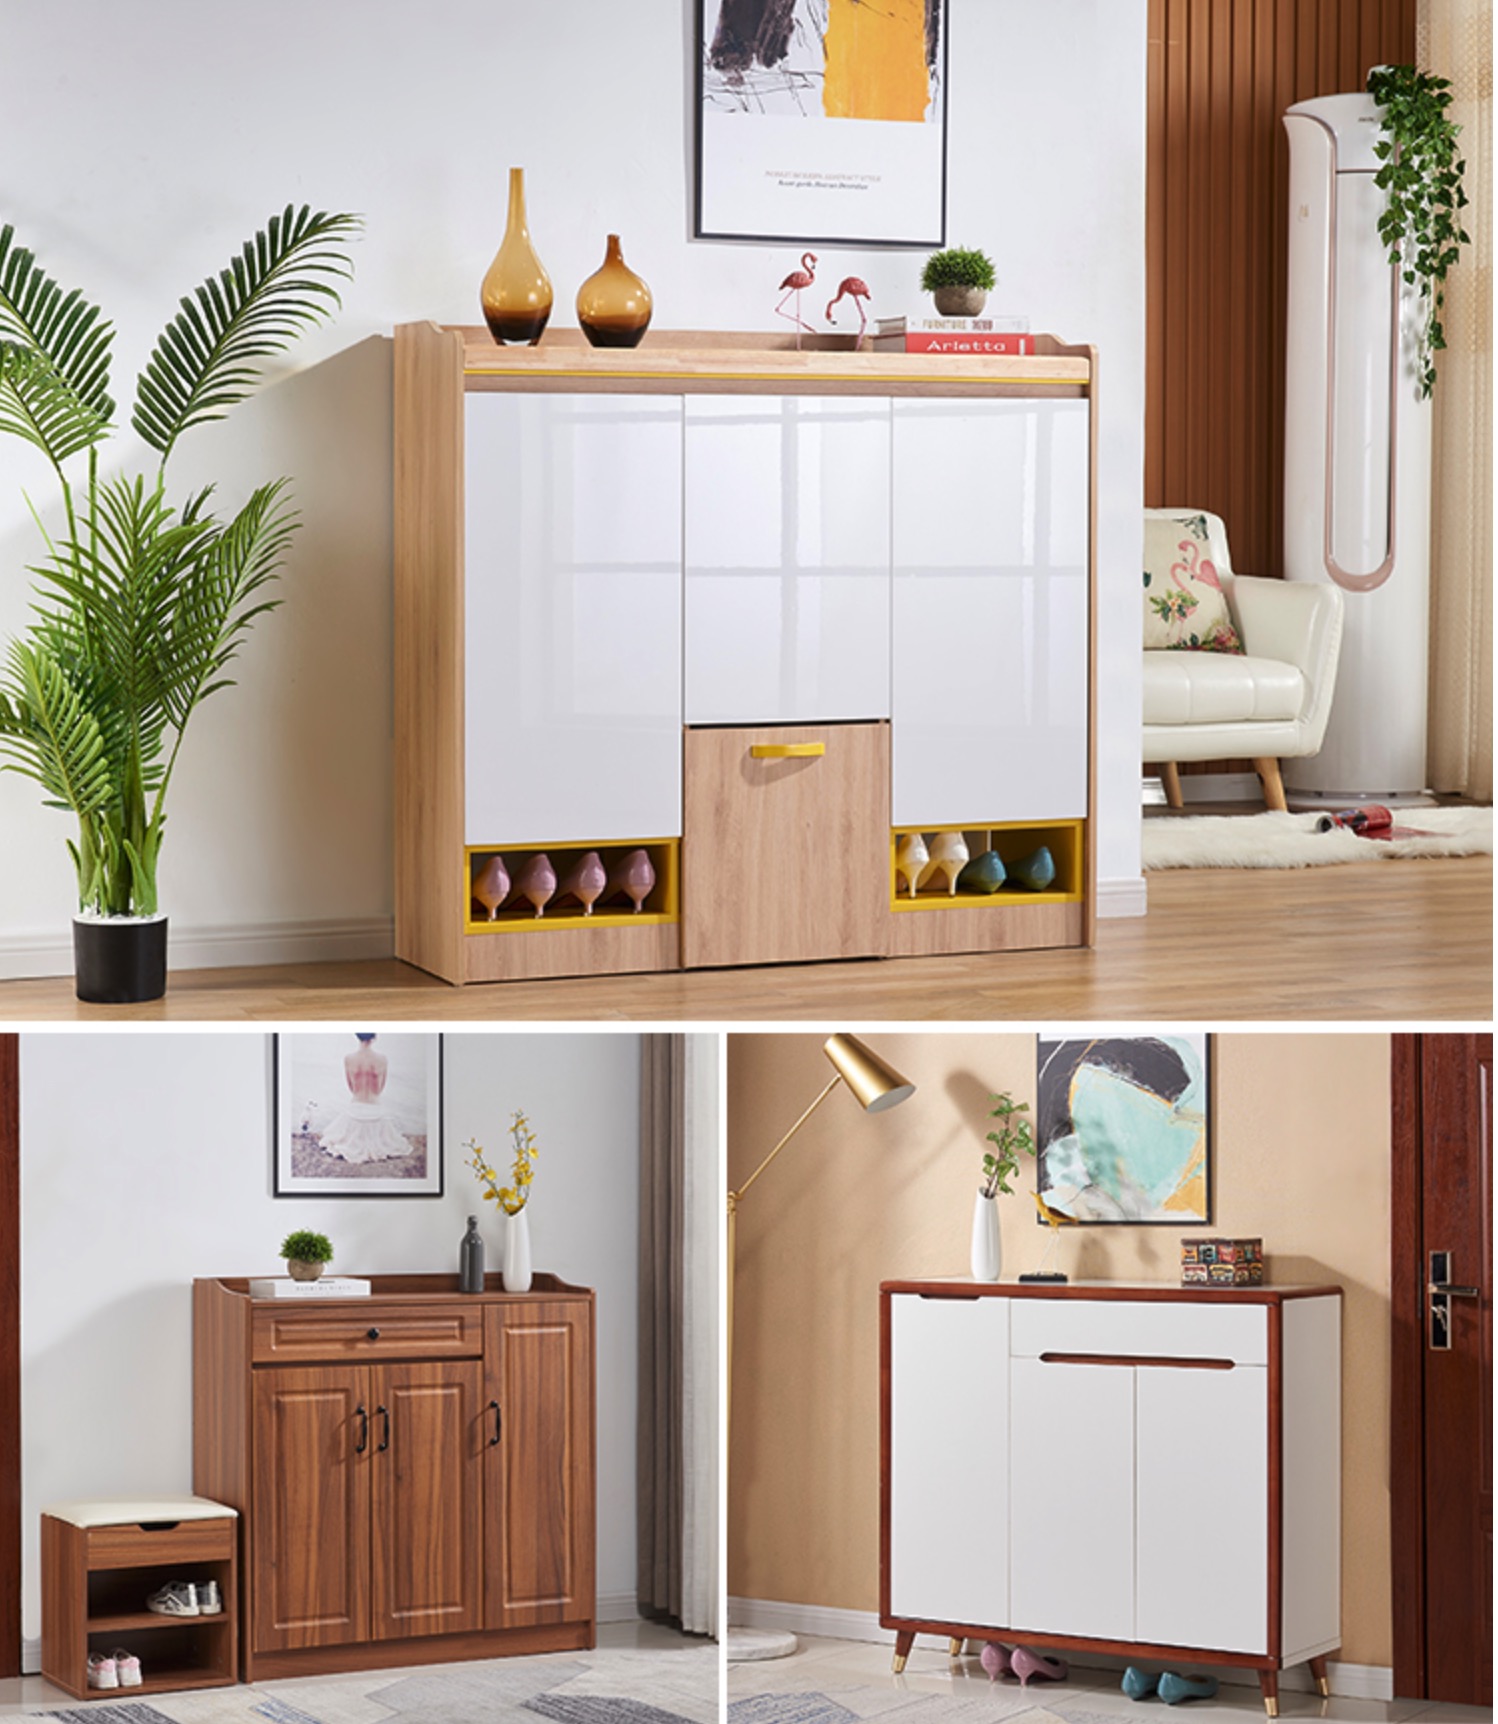 The best furniture photography is in China Side cabinet